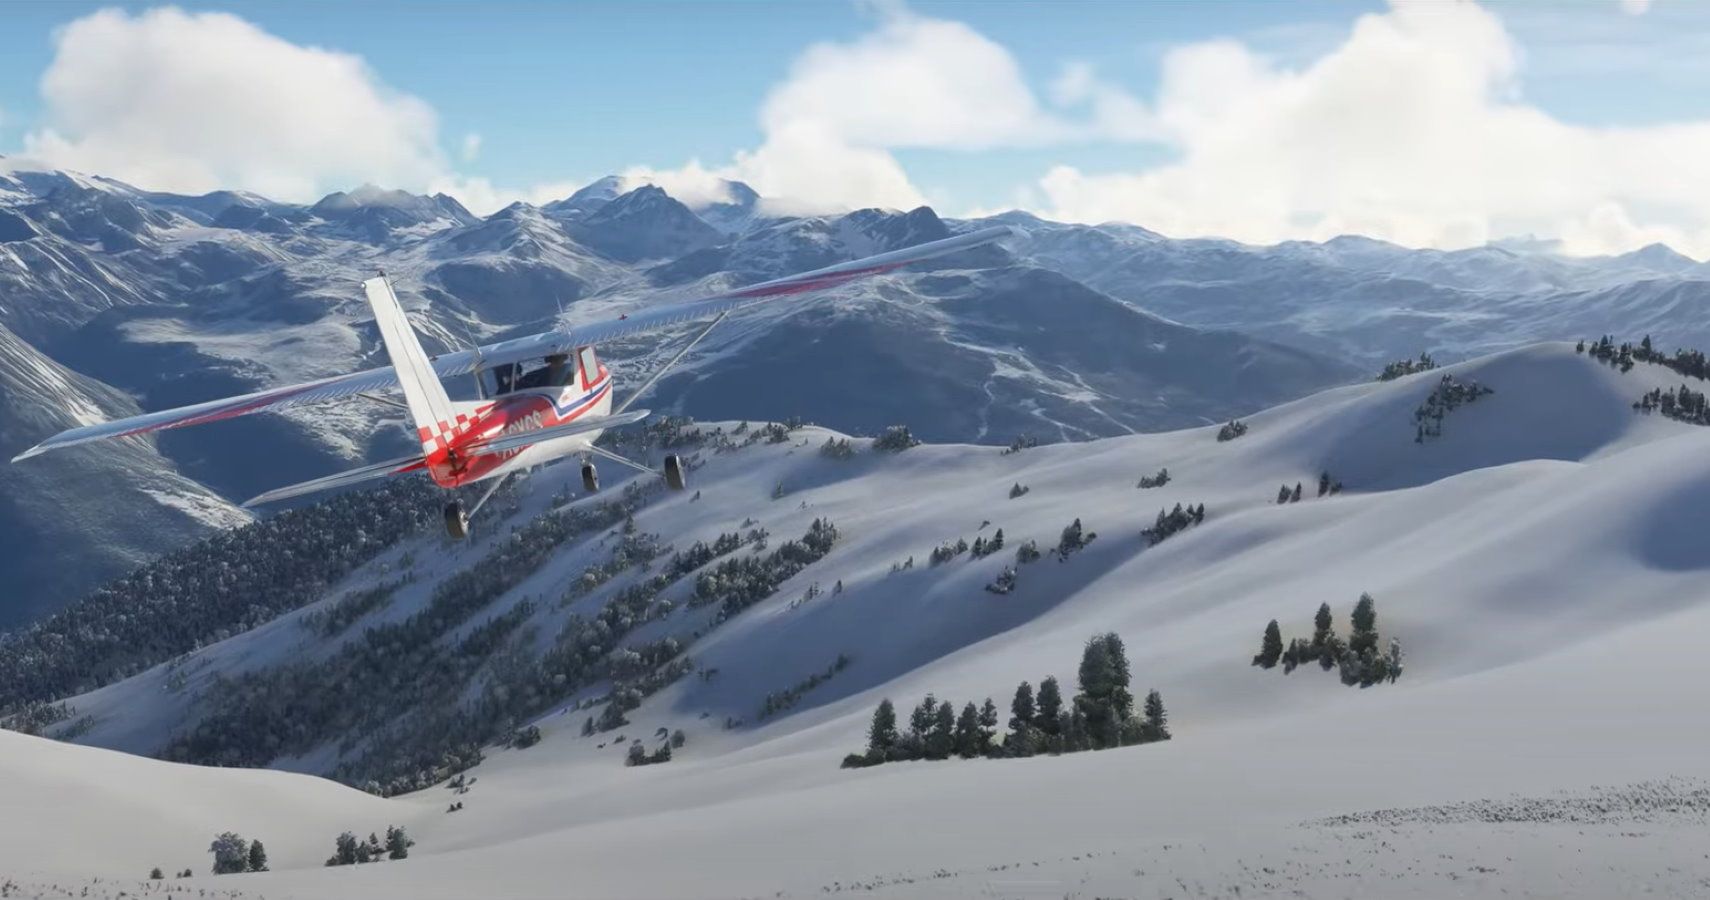 Microsoft Flight Simulator launches real-time snow in happy New Year message